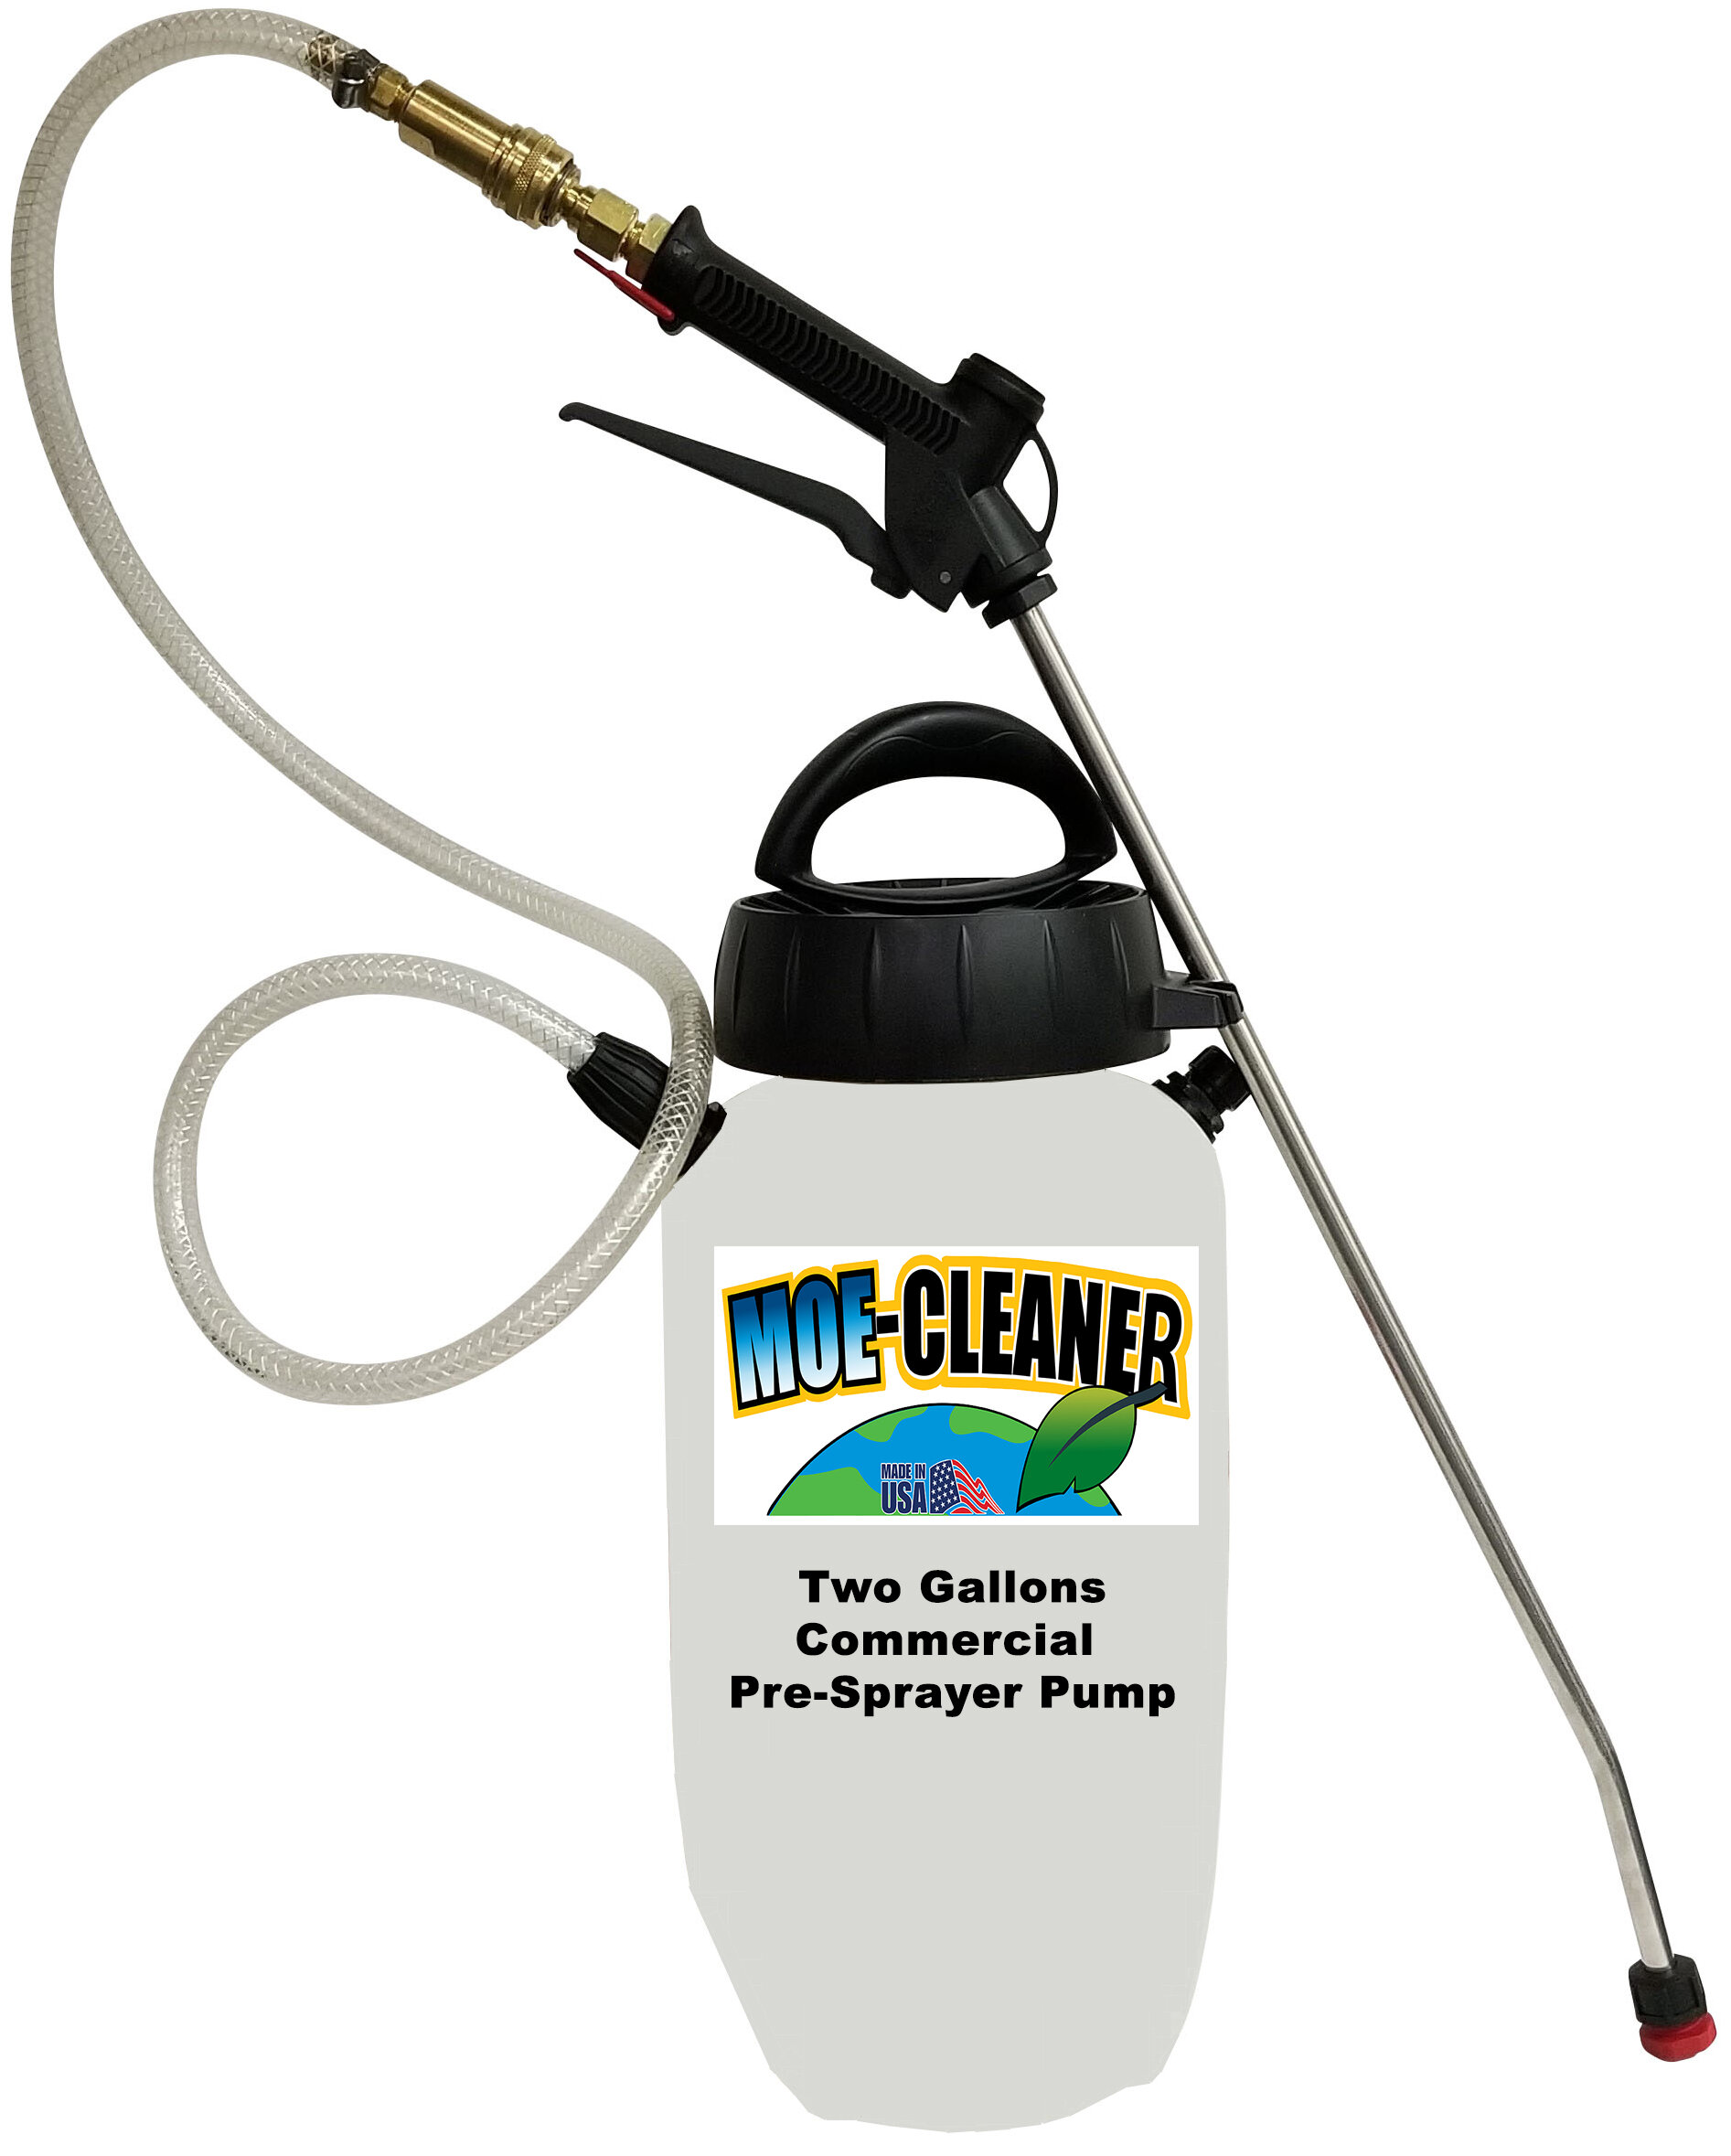 Moe-Cleaner Products — Moe-Cleaner